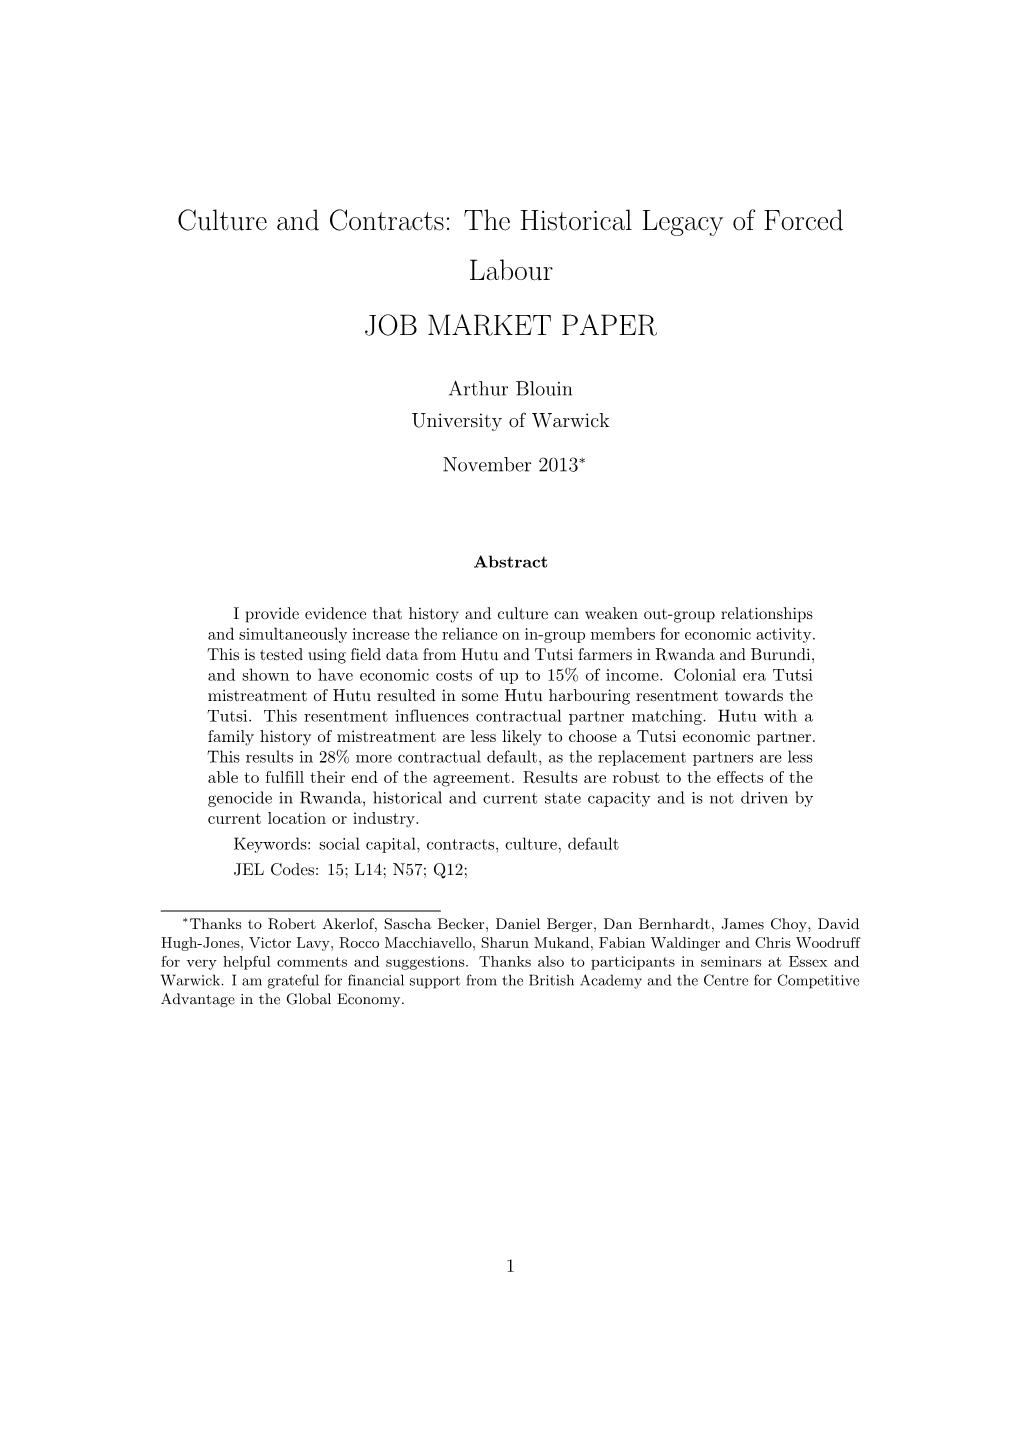 Culture and Contracts: the Historical Legacy of Forced Labour JOB MARKET PAPER